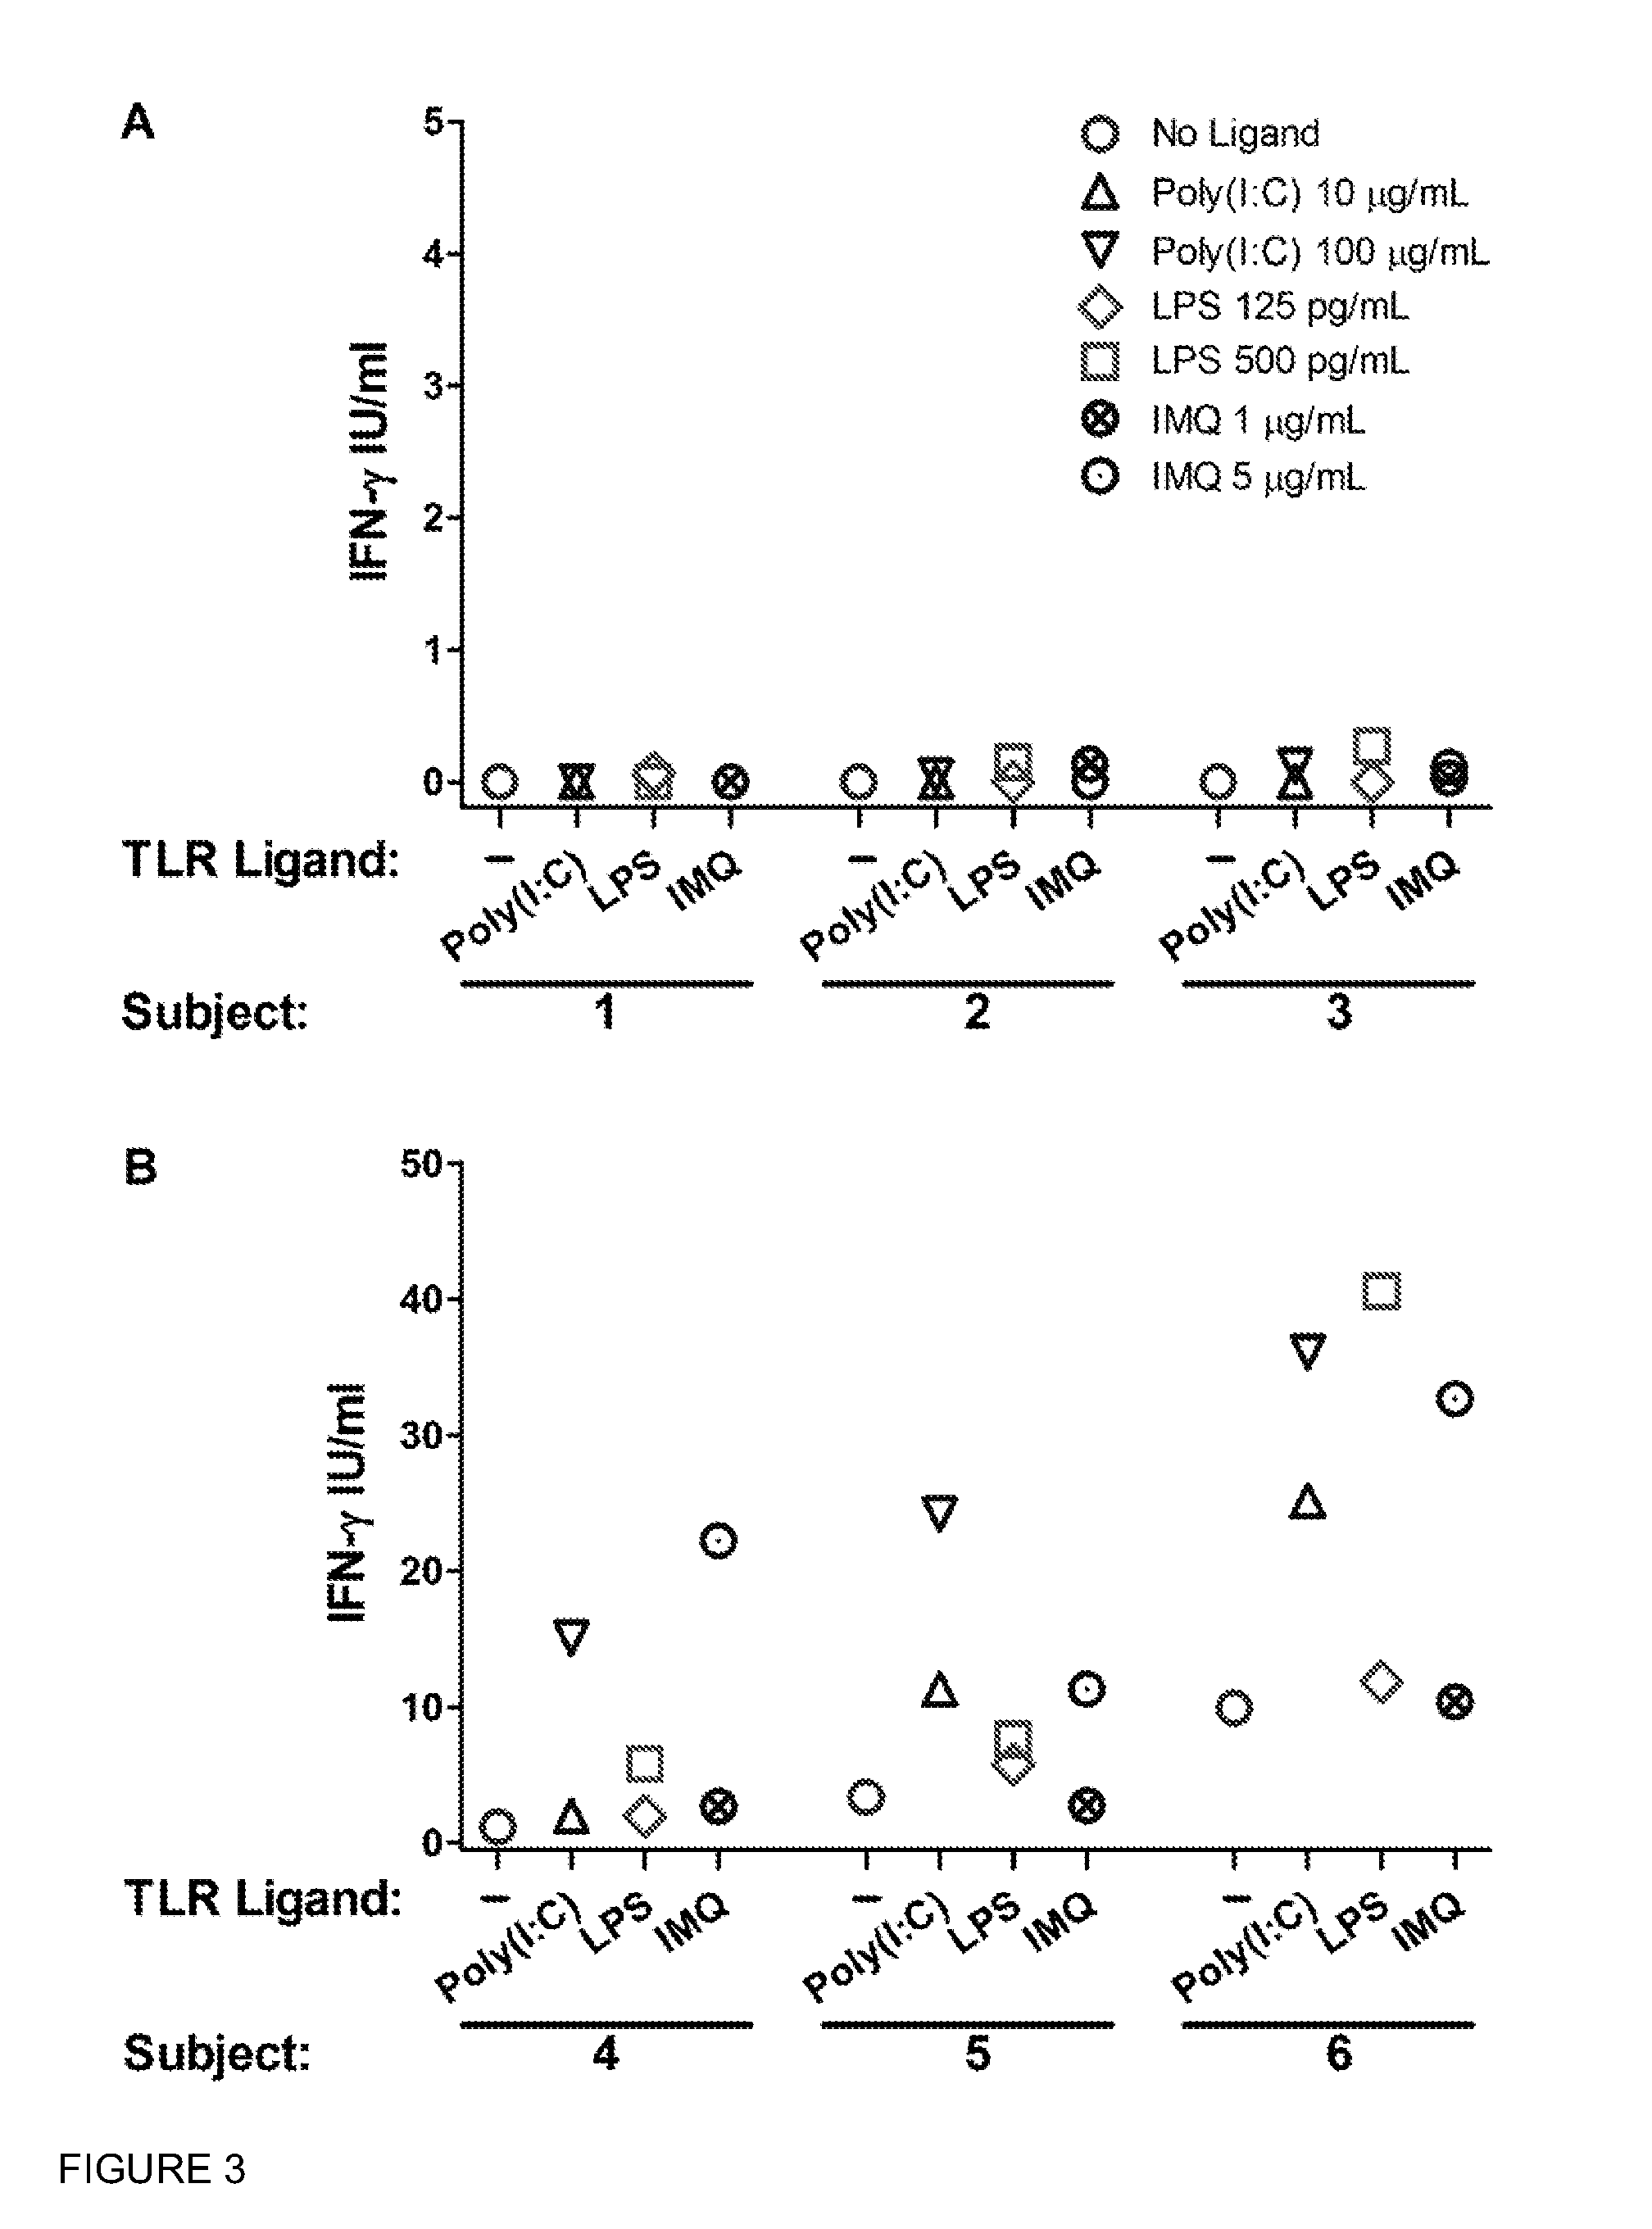 Immunomodulation of functional T cell assays for diagnosis of infectious or autoimmune disorders